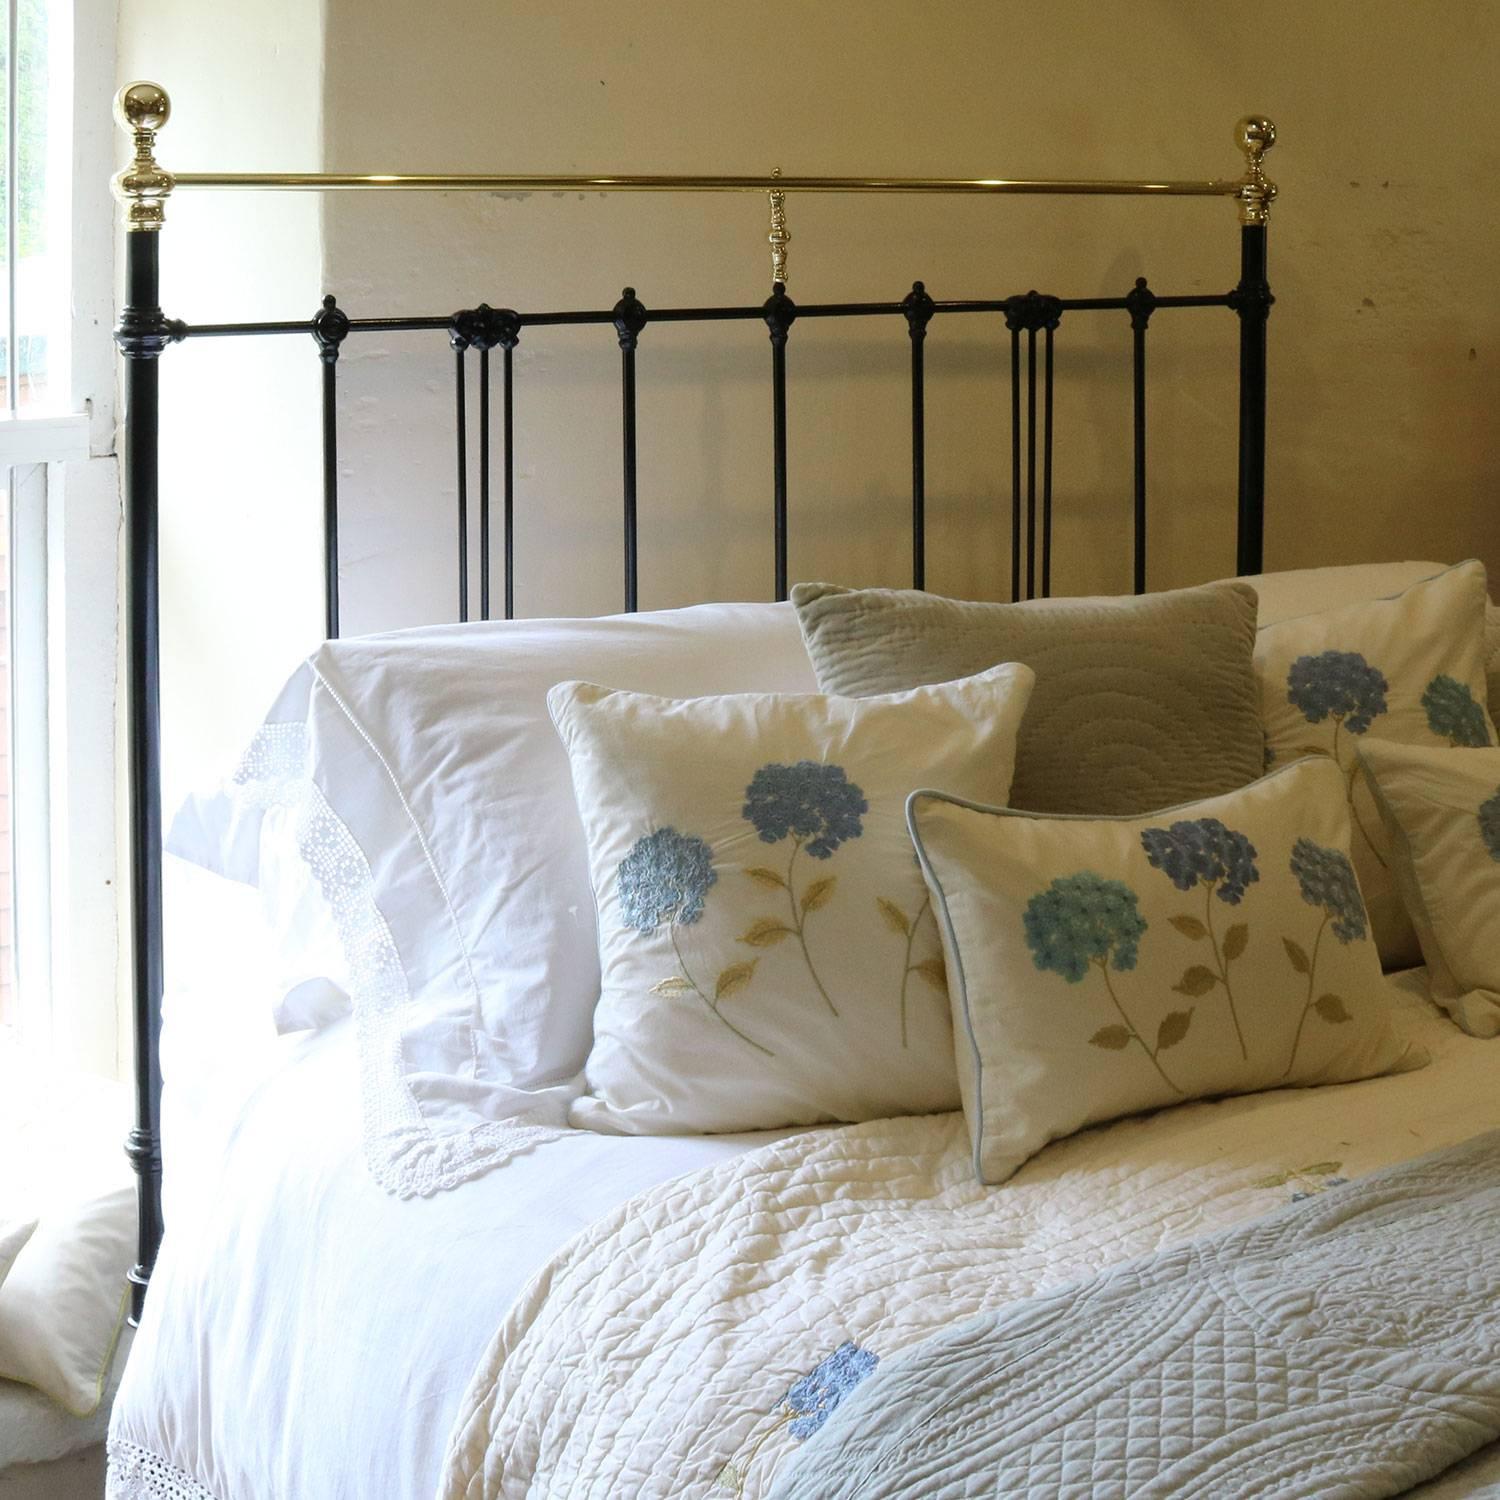 A simple brass and cast iron low ended bed with delicate mouldings. This bed has been adapted from an original frame, circa 1900.

The bed accepts a British king-size or American queen-size base and mattress (60 in wide, 5ft or 150cm).

The price is